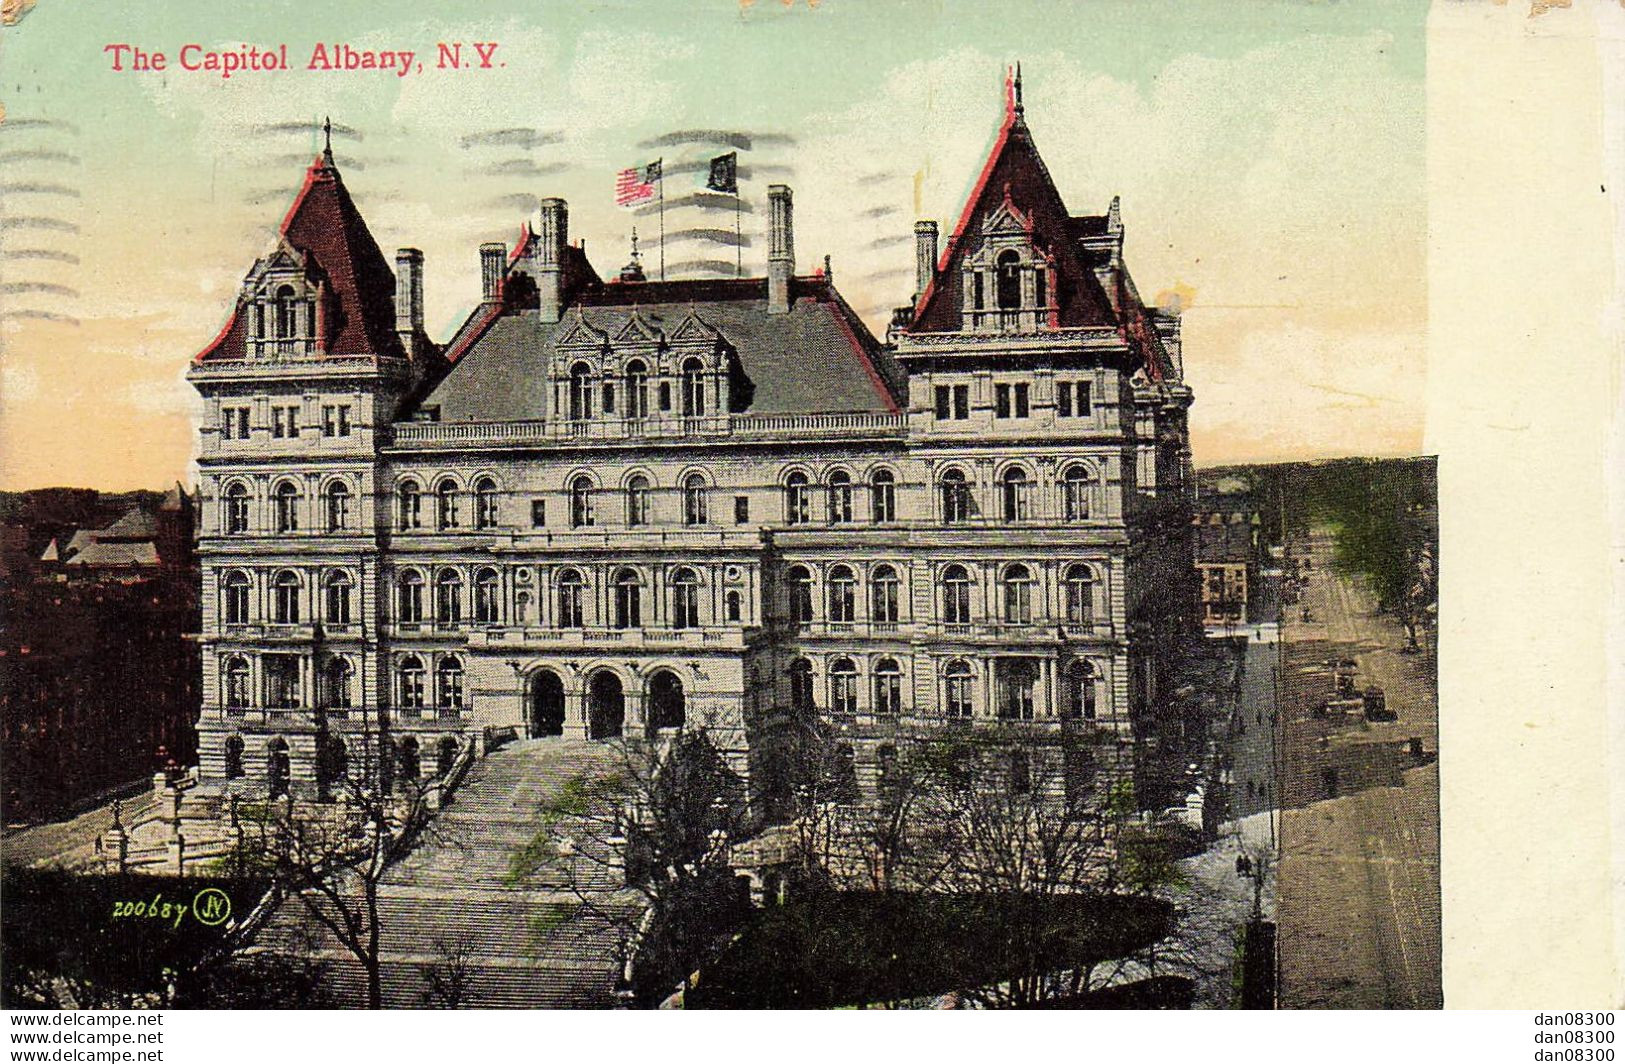 THE CAPITOL ALBANY NEW YORK - Andere Monumente & Gebäude